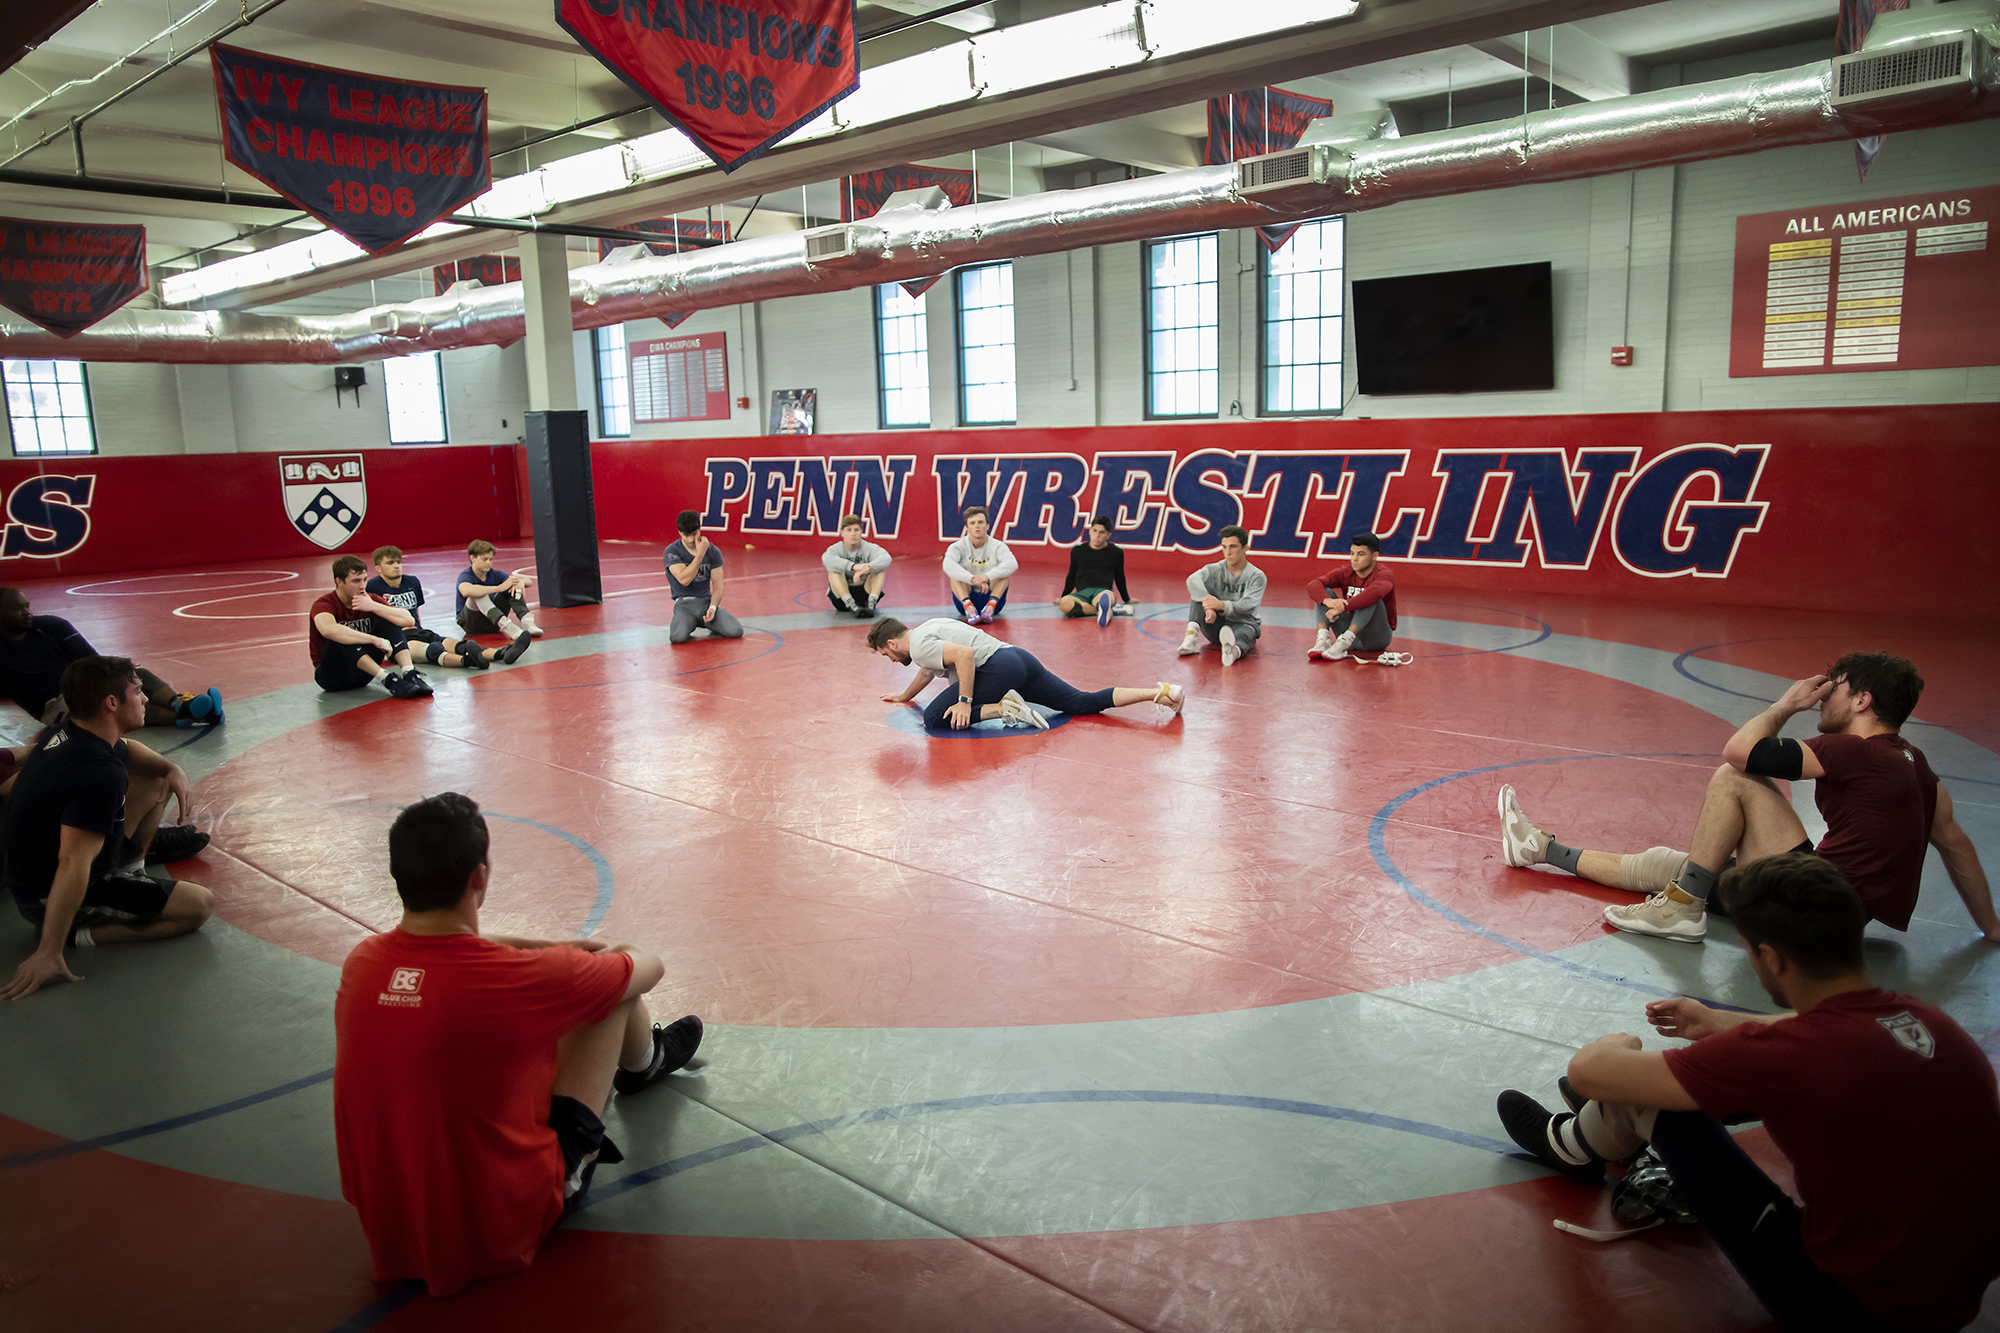 wide view of wrestling training center